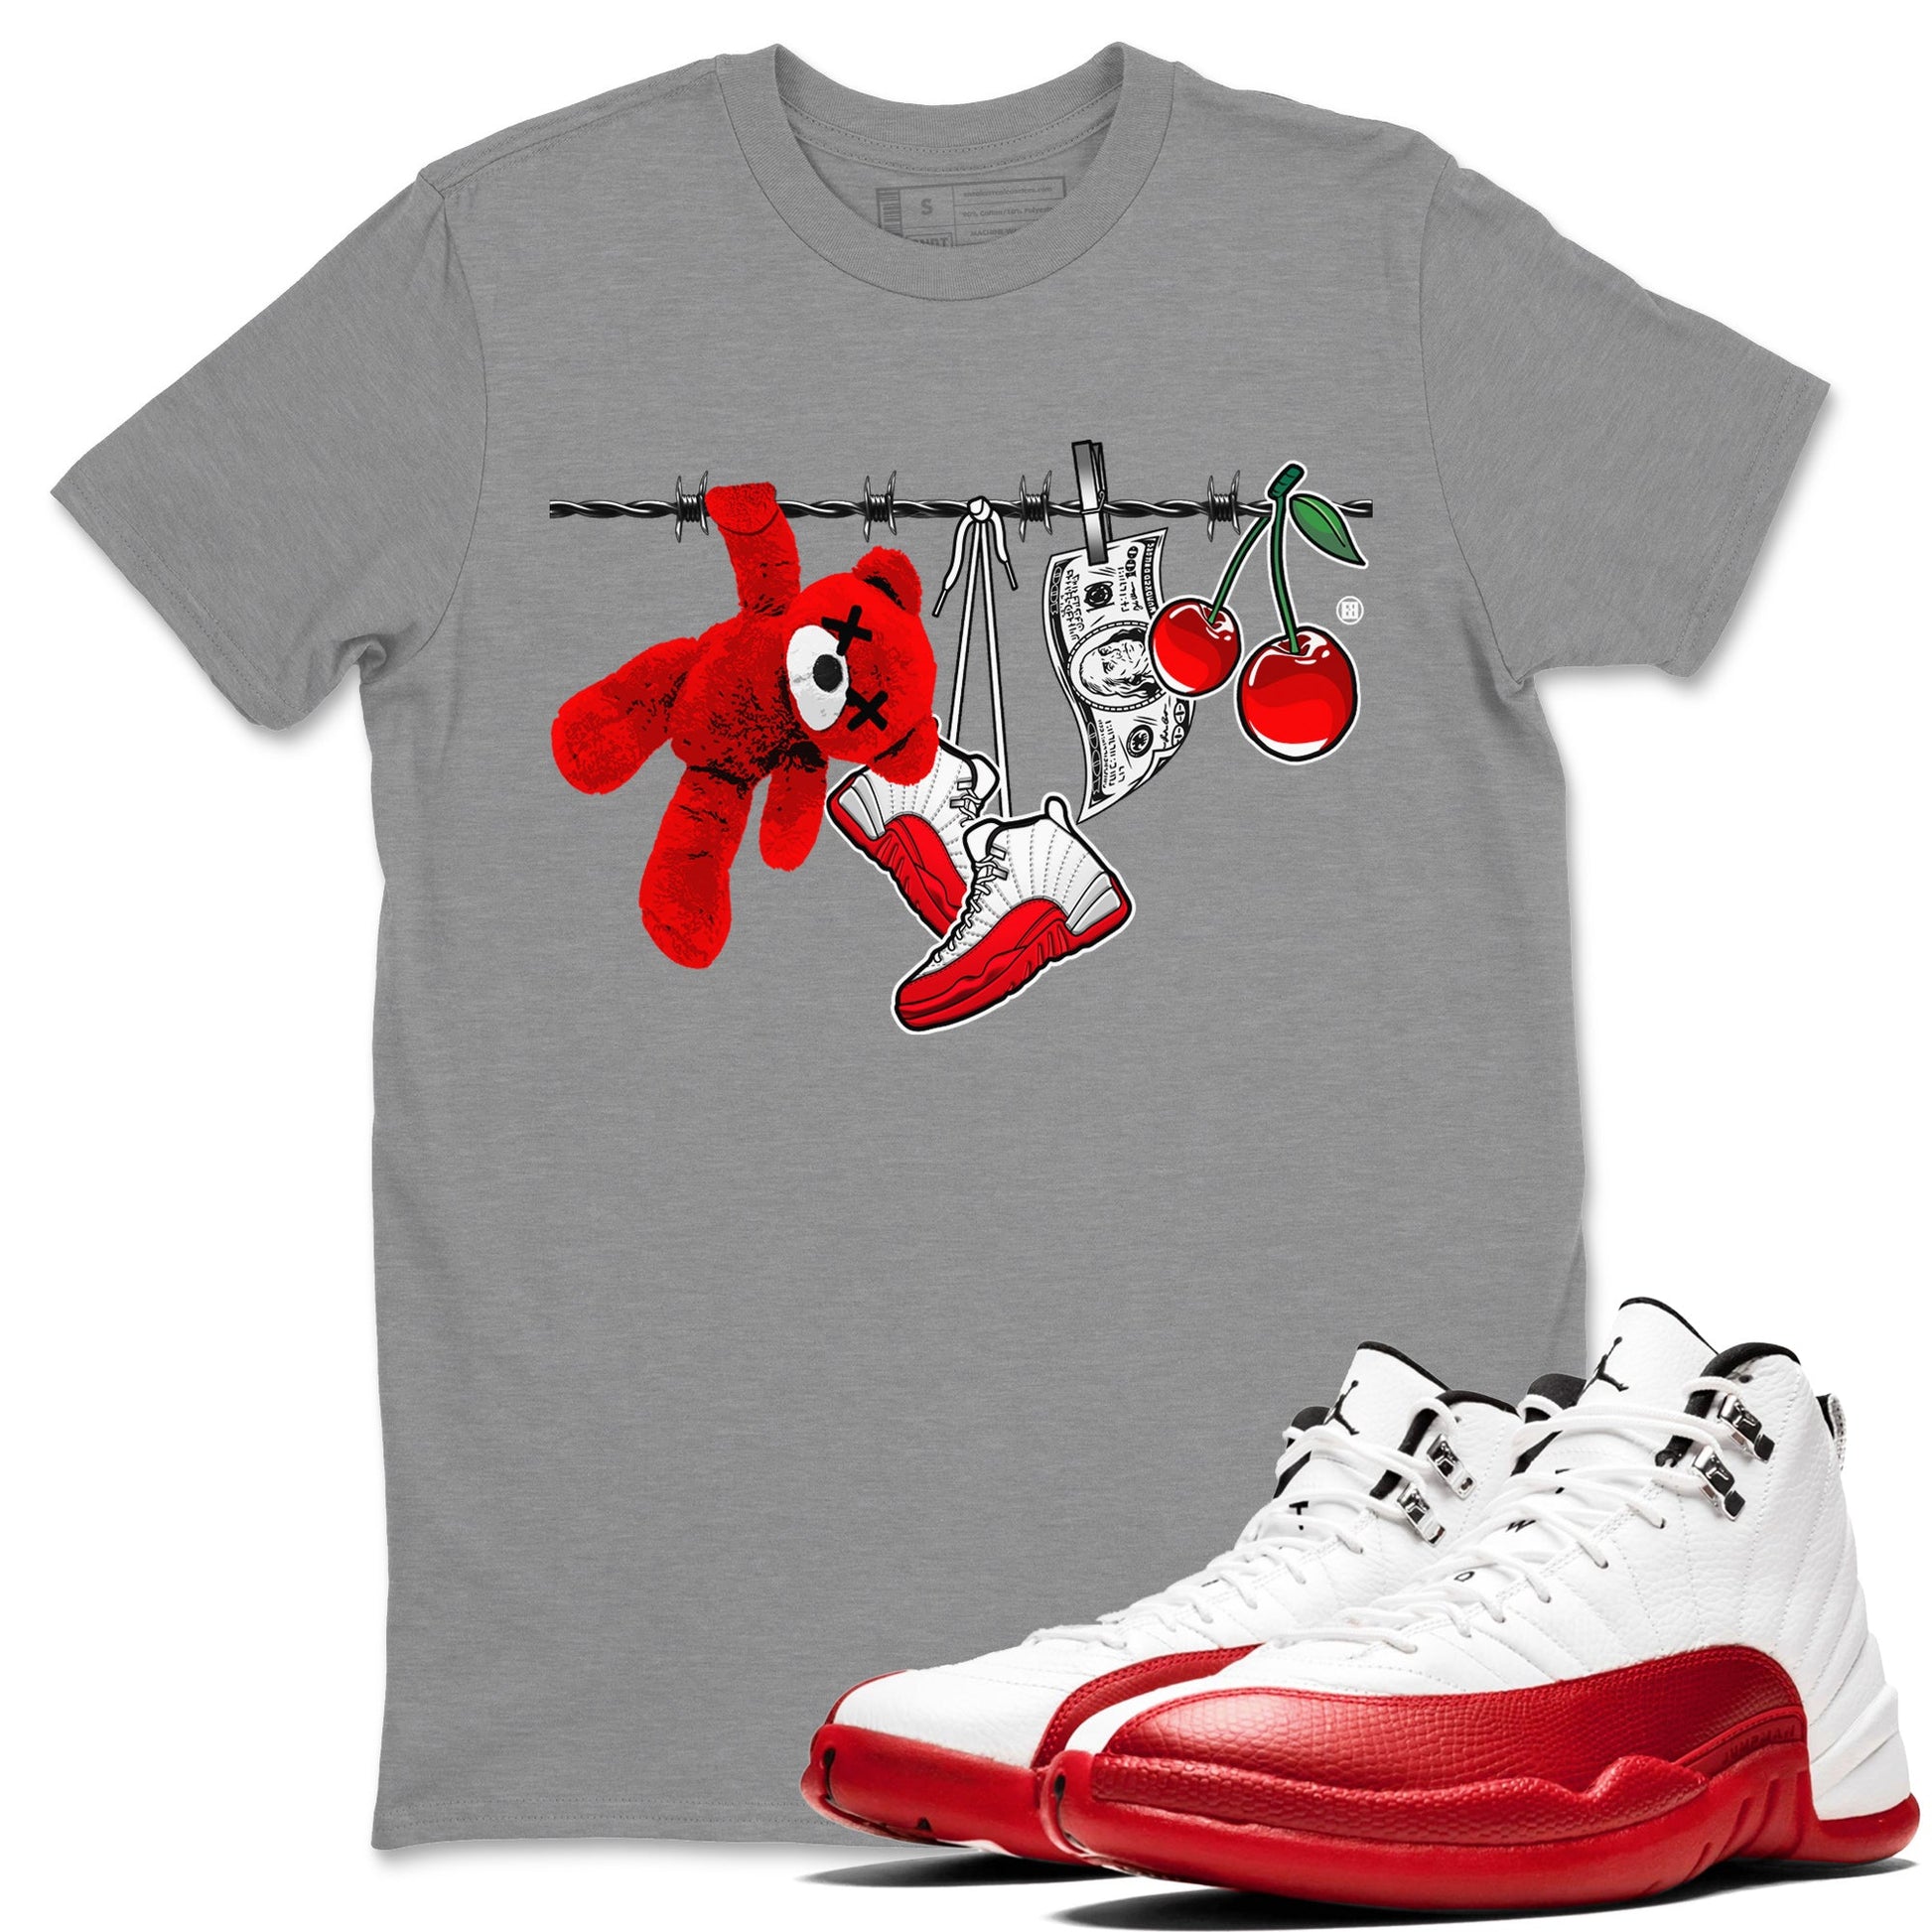 12s Cherry Sneaker Match Tees Clothesline Sneaker Tees Air Jordan 12 Cherry Sneaker Release Tees Unisex Shirts Heather Grey 1